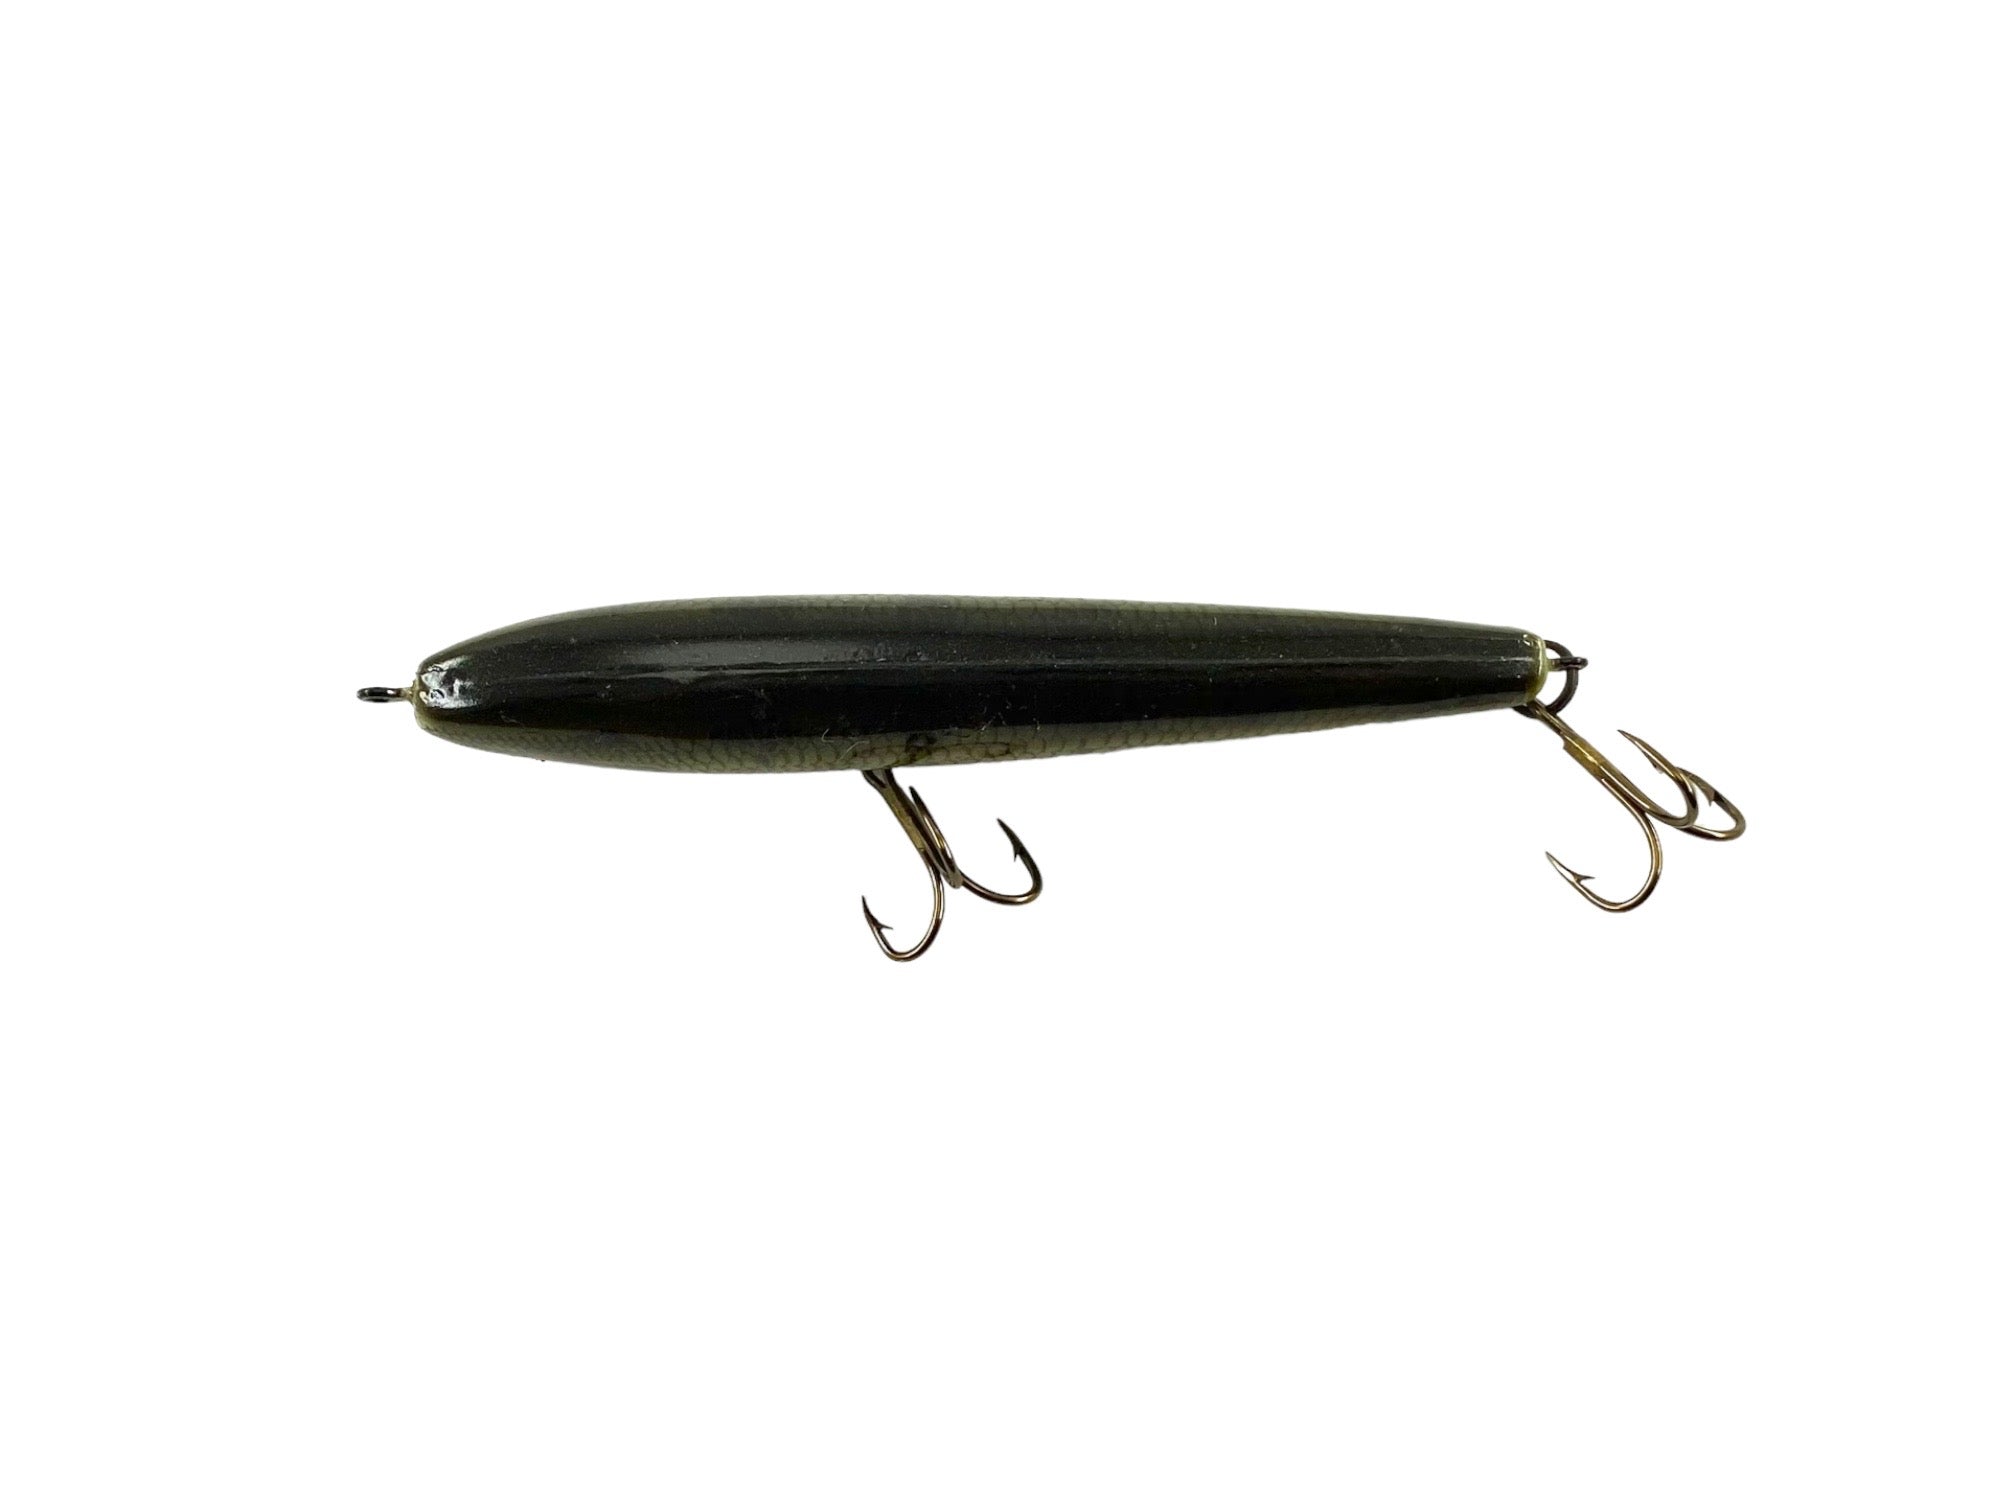 REBEL LURES JUMPIN' MINNOW Fishing Lure • T1076 NATURALIZED BASS